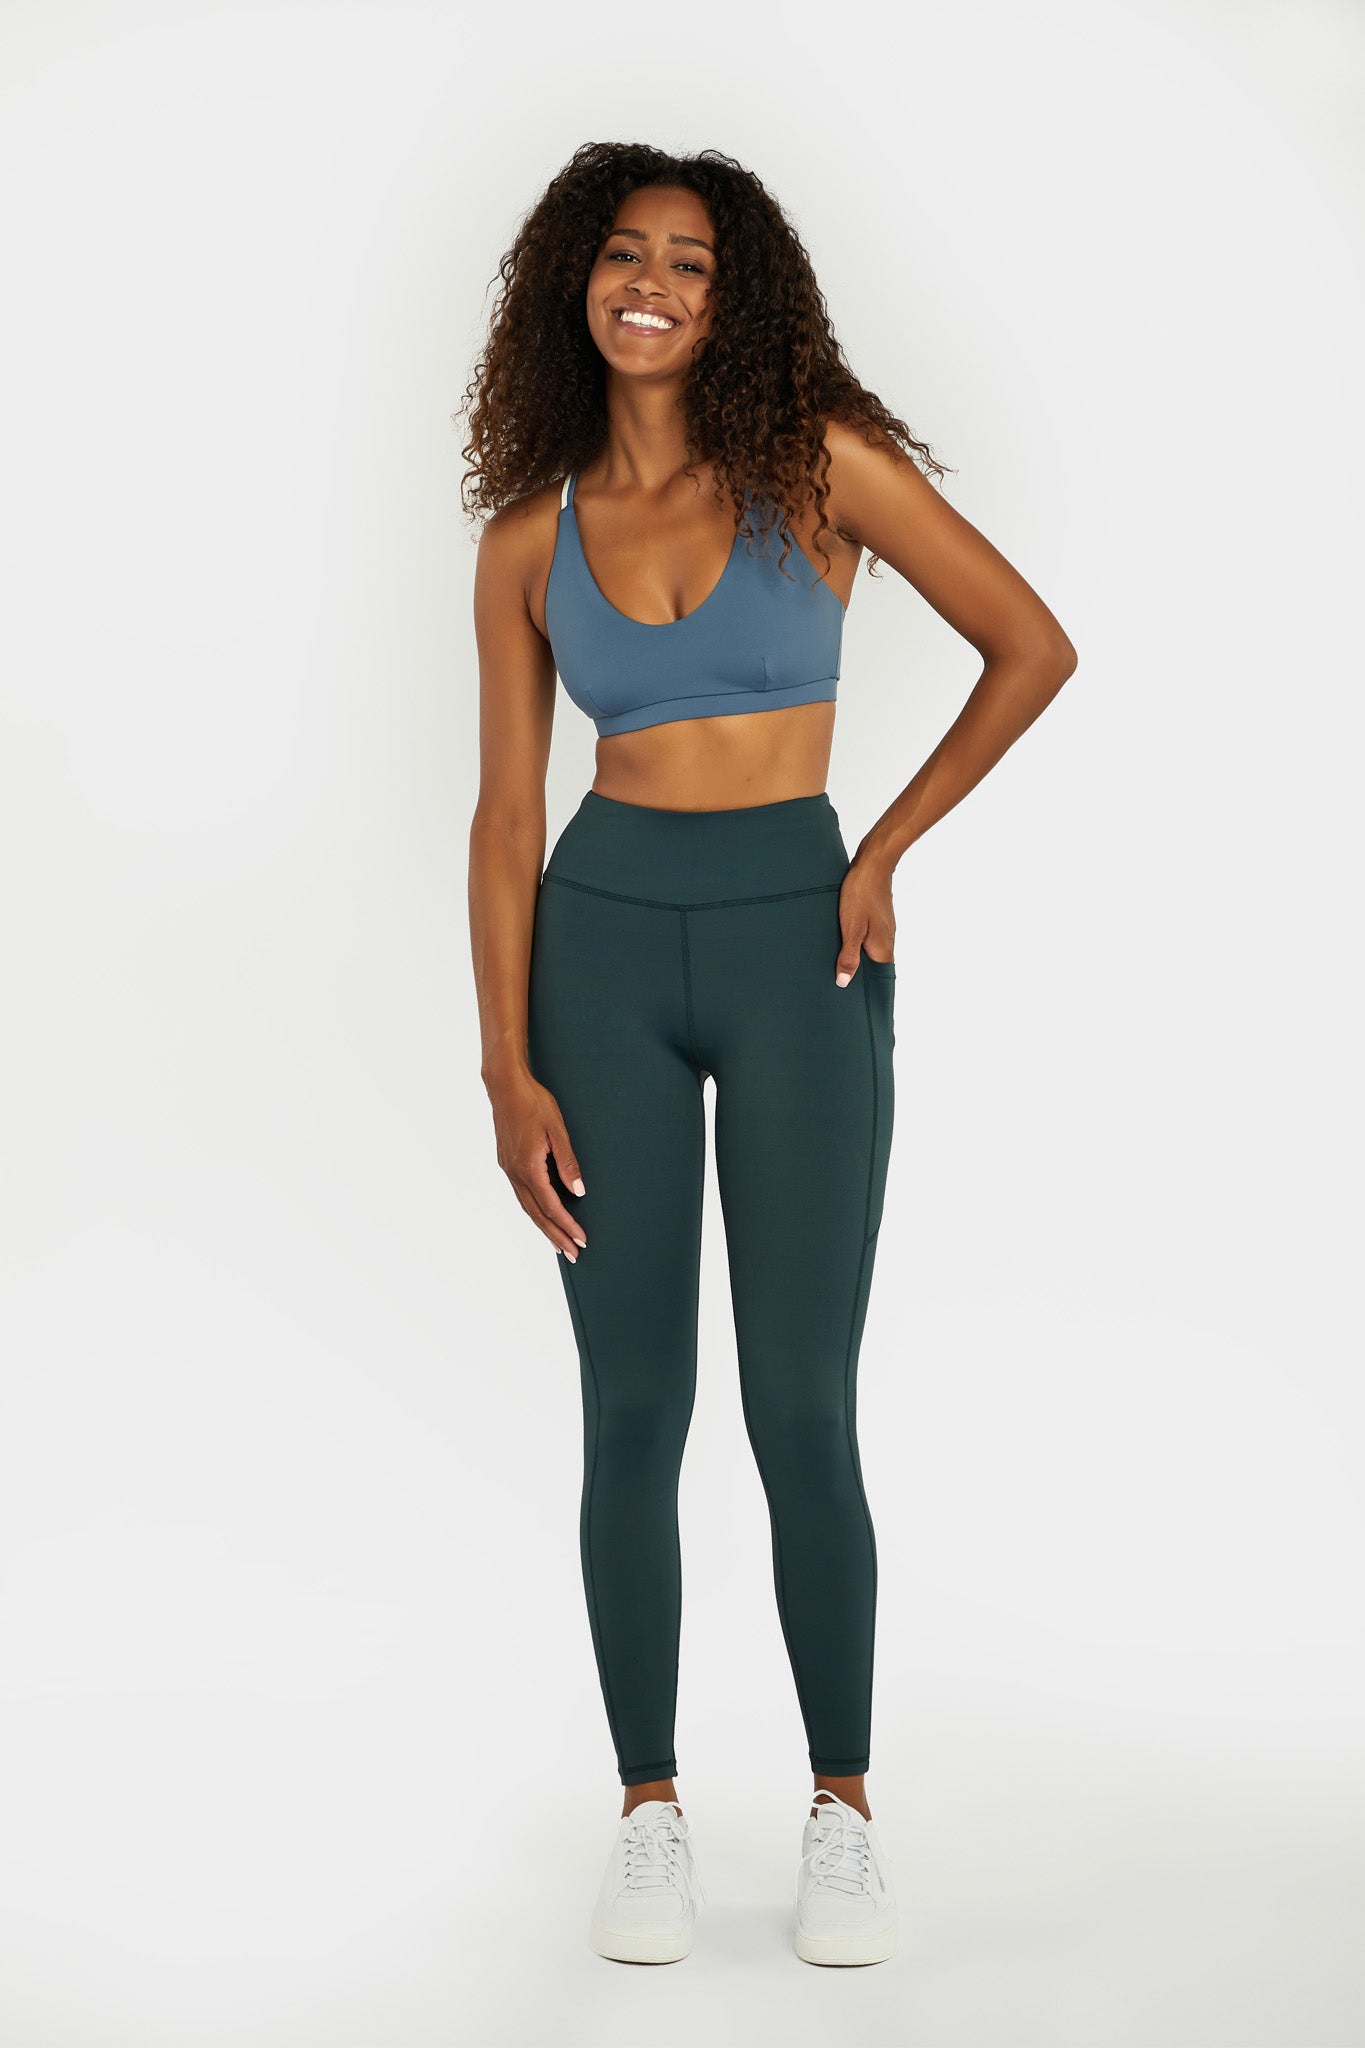 7 Squat-Proof Leggings That Are Perfect for Leg Day | Well+Good